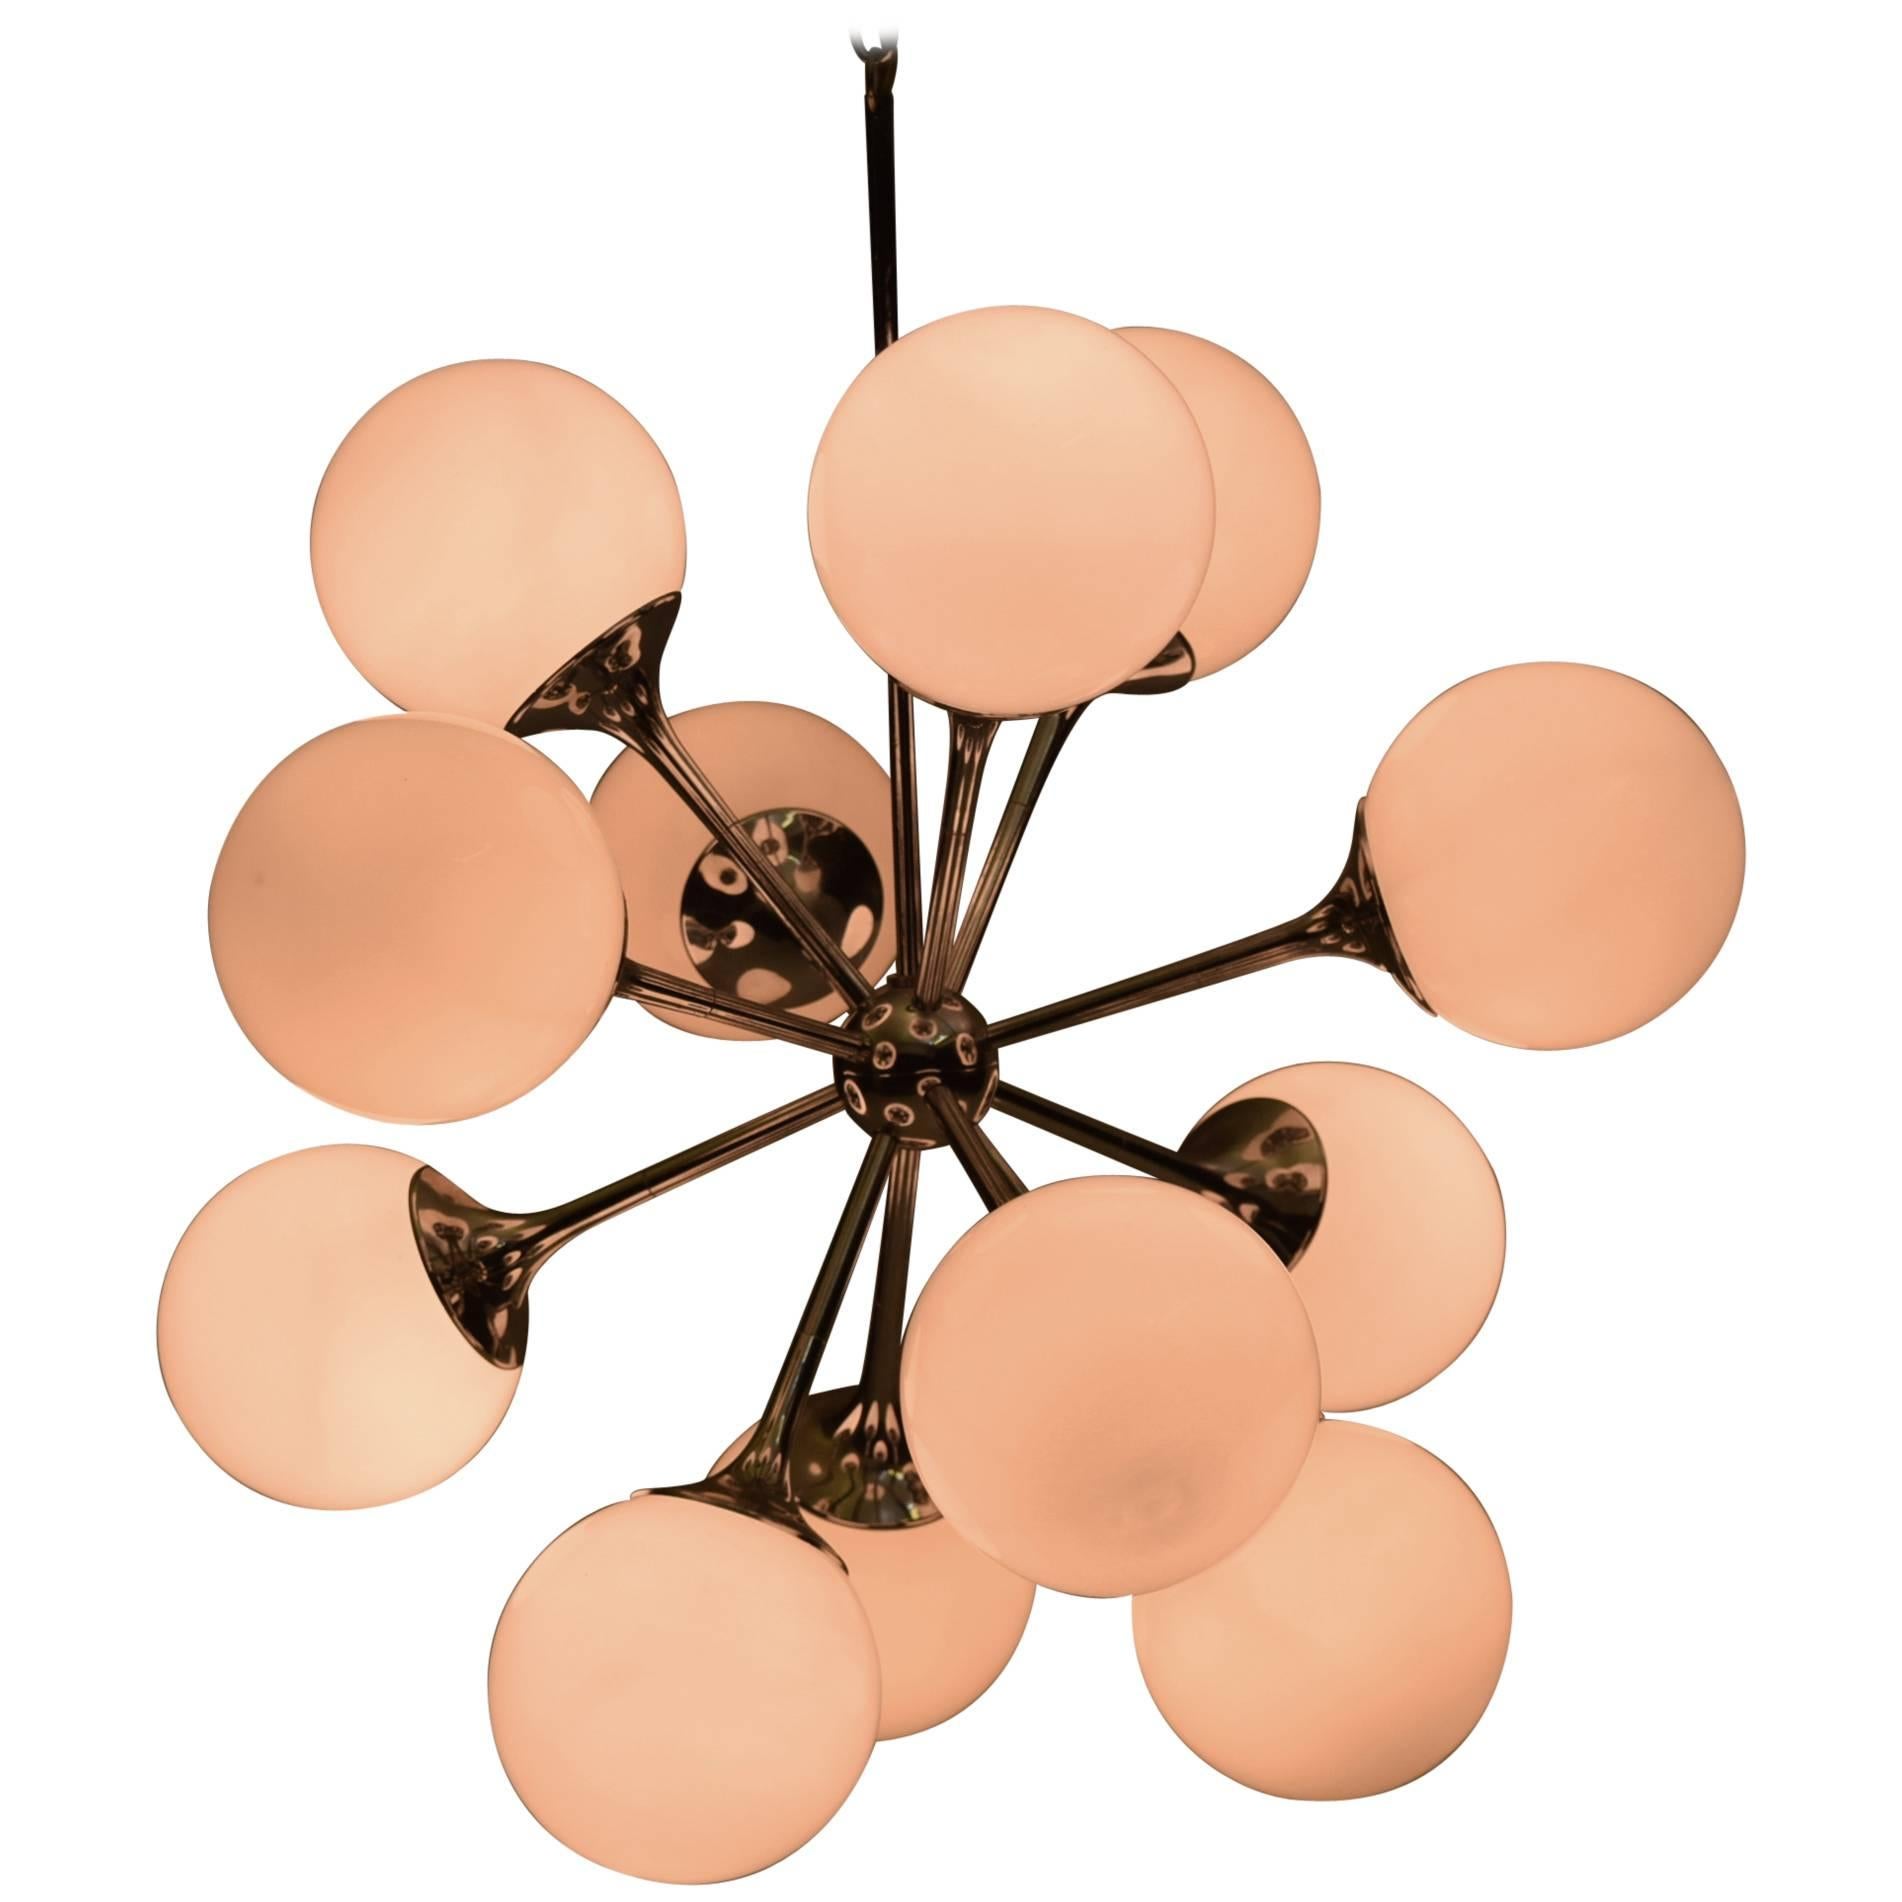 Featuring 12 globes each with 40 watt capacity, this pristine Lightolier chandelier features all original hardware inclusive of ceiling plate signed by the manufacturer.

Measures 22" diameter and with the chain total height is 32" (can